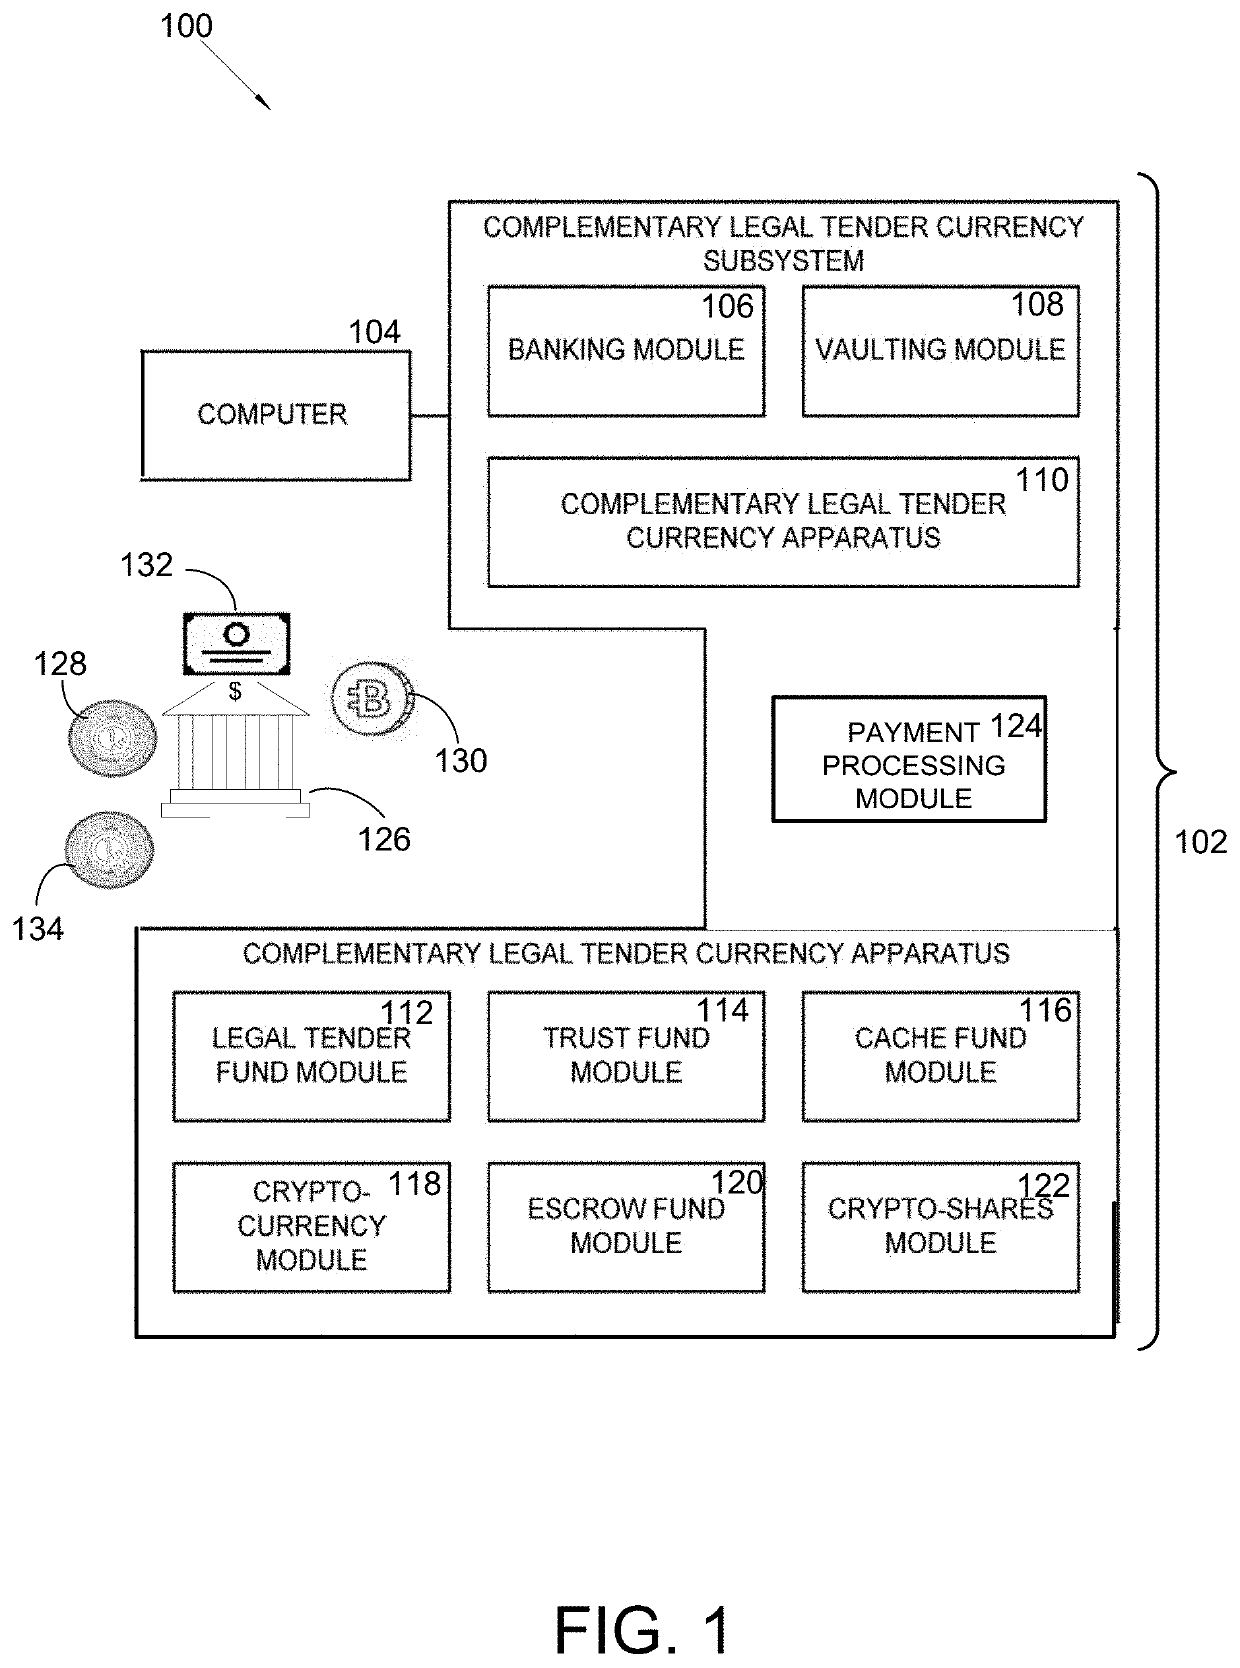 Method for Performing Transactions With Exchangeable Cryptocurrency and Legal Tender Currency